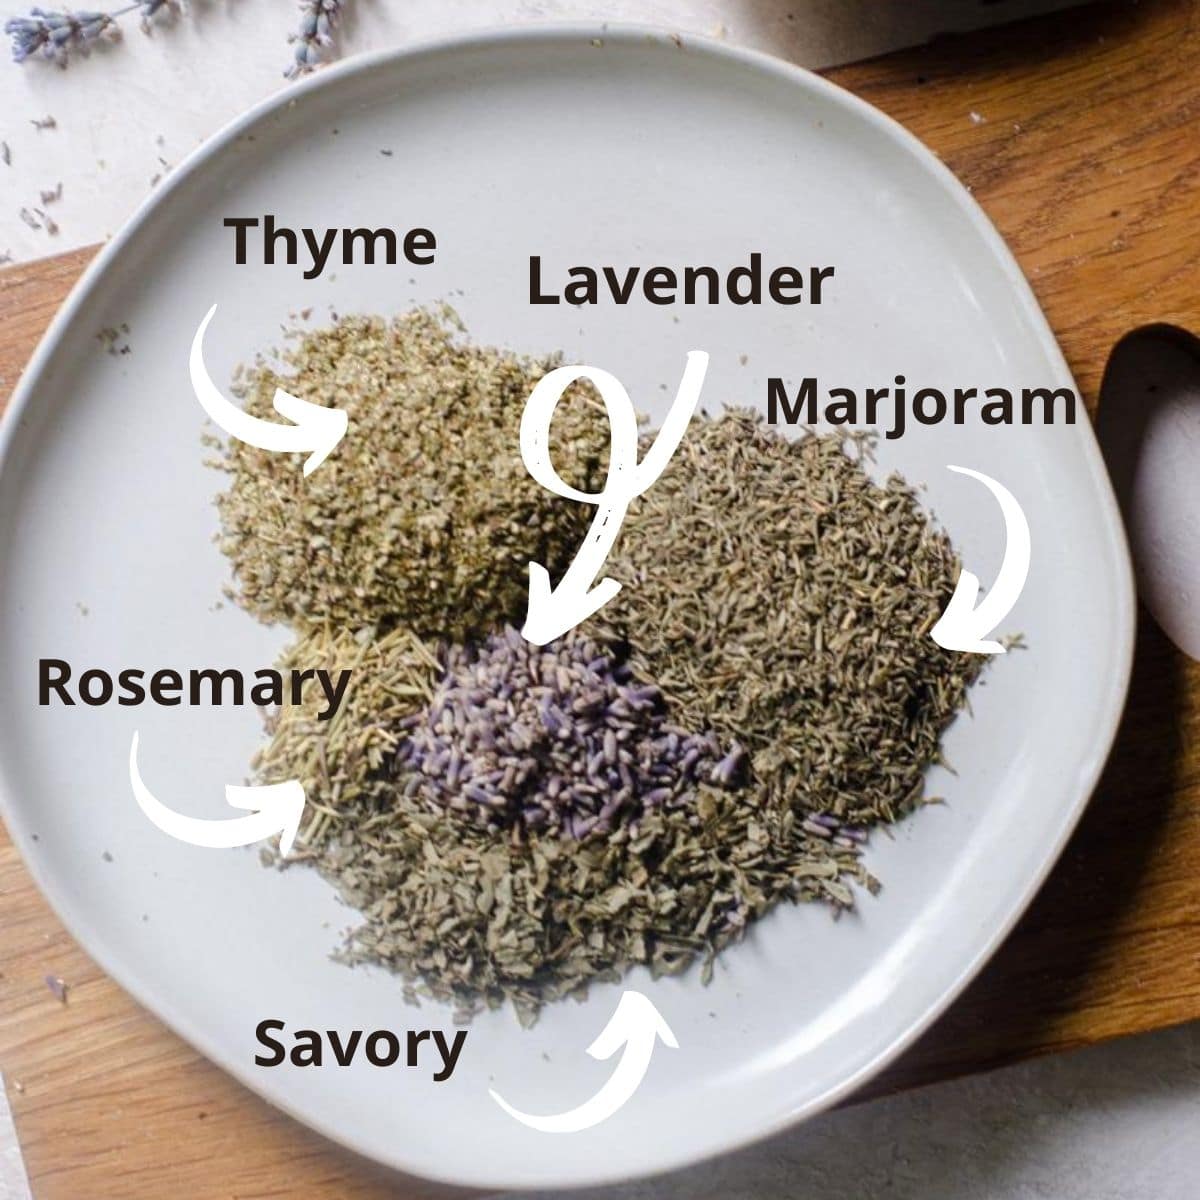 A plate of herbs with labels saying which type they are.